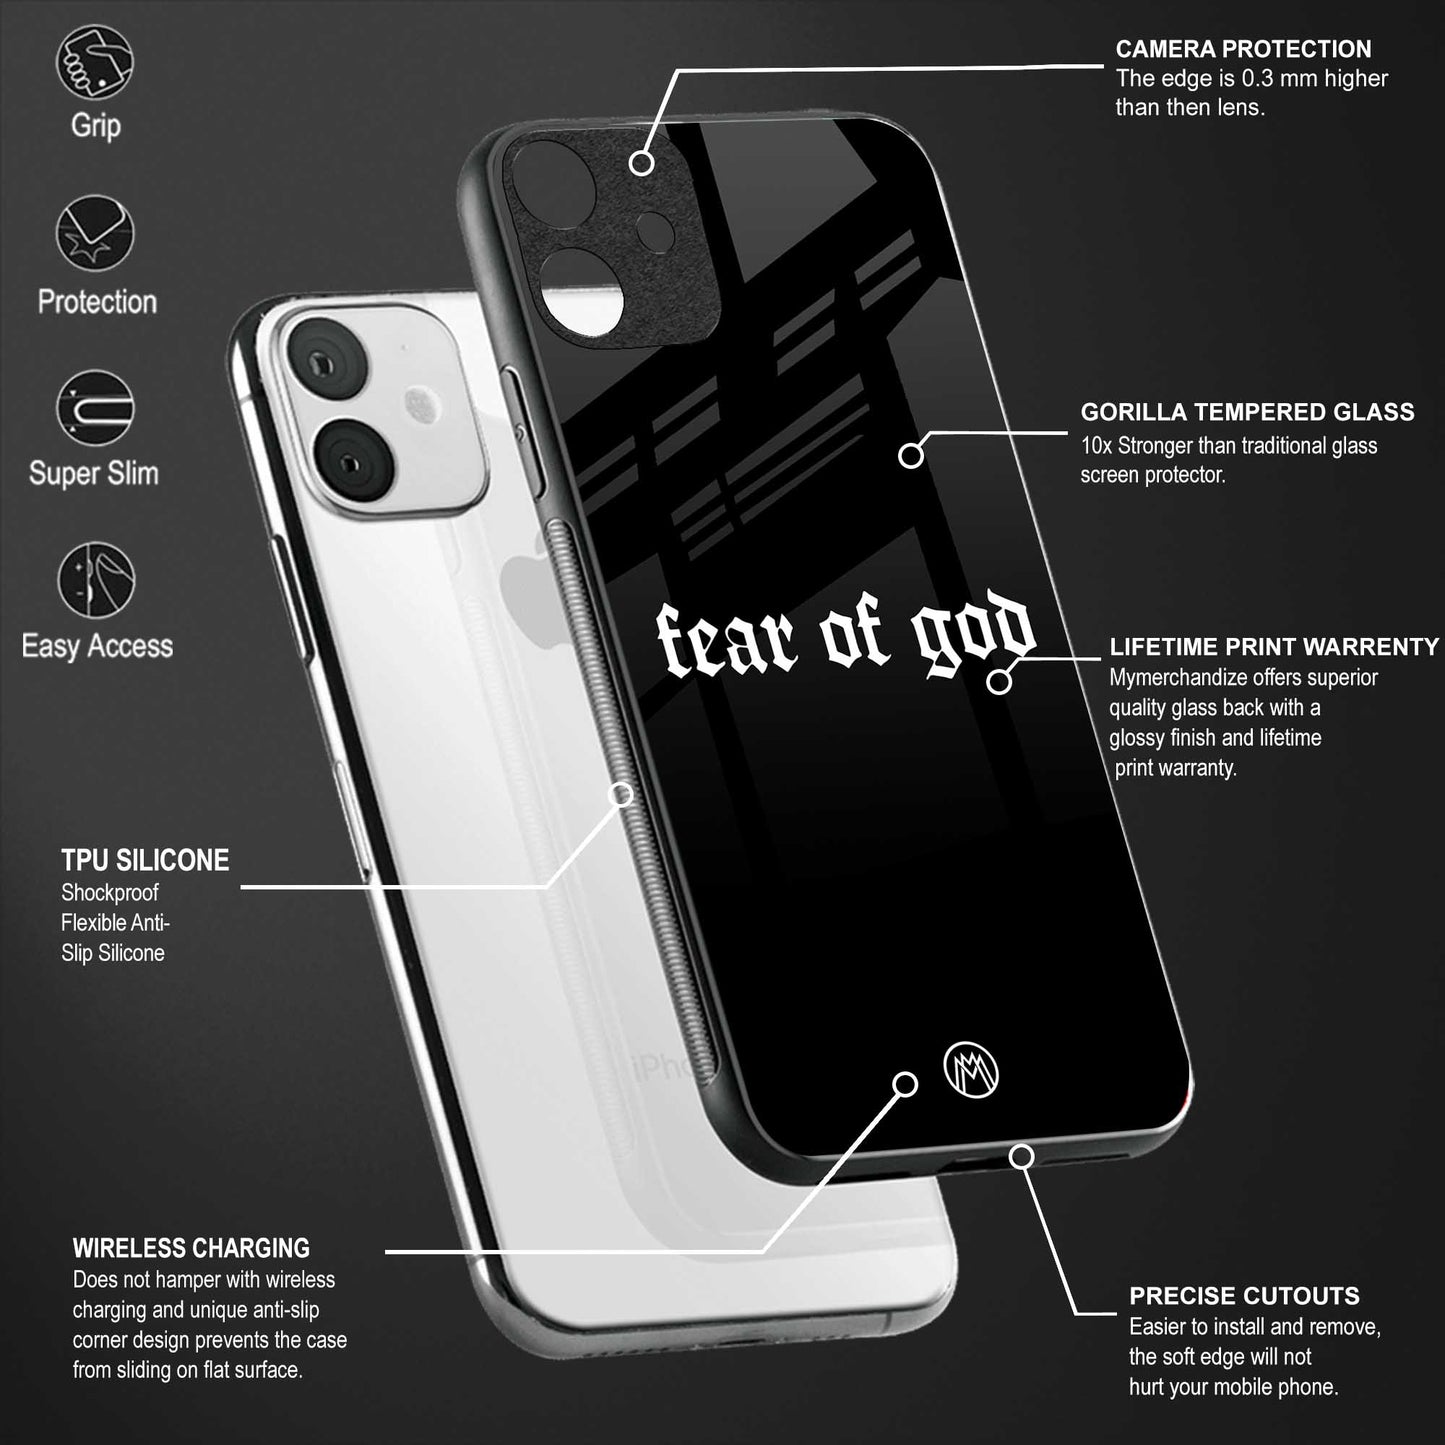 fear of god phone cover for redmi 6